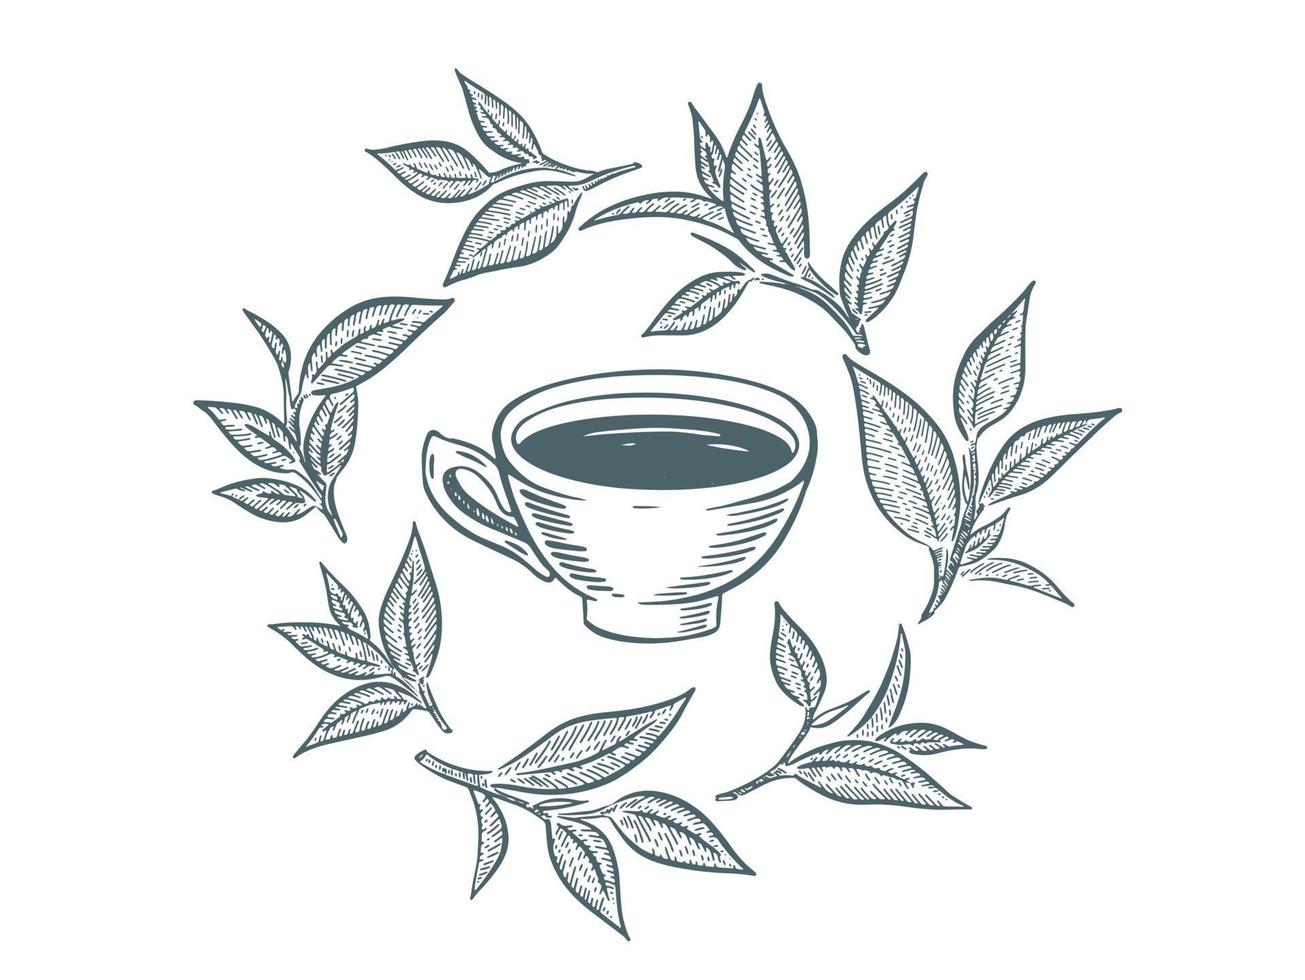 Green Tea Cup, hand drawn, drawing isolated on white vector